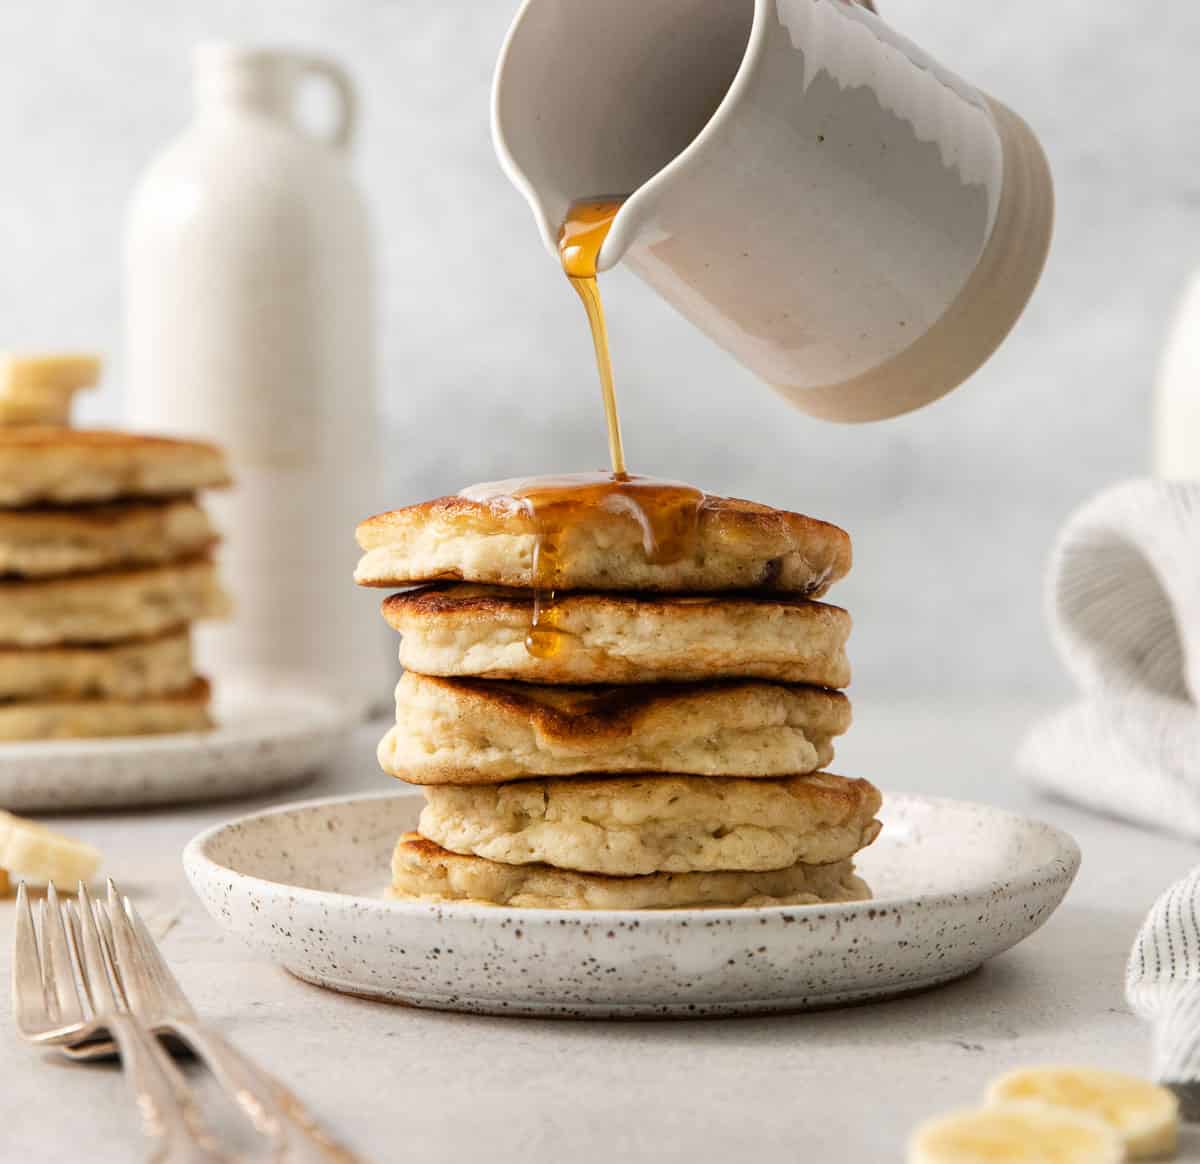 Gluten-free banana pancakes stacked up on a plate with a hand pouring syrup over them